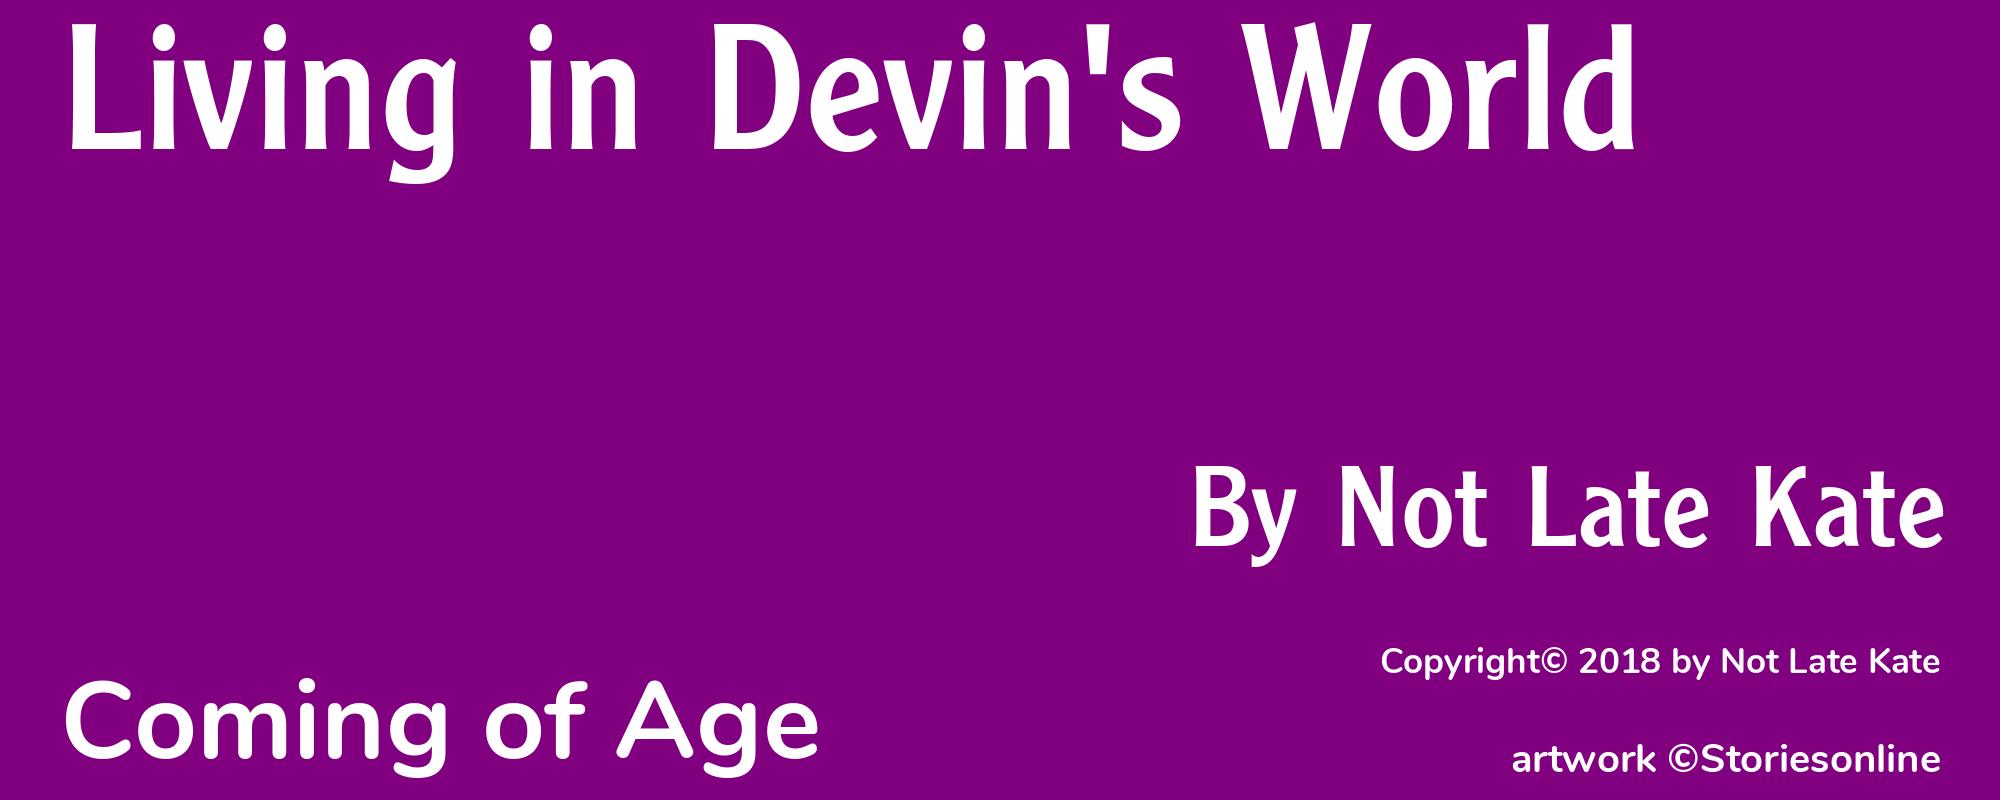 Living in Devin's World - Cover